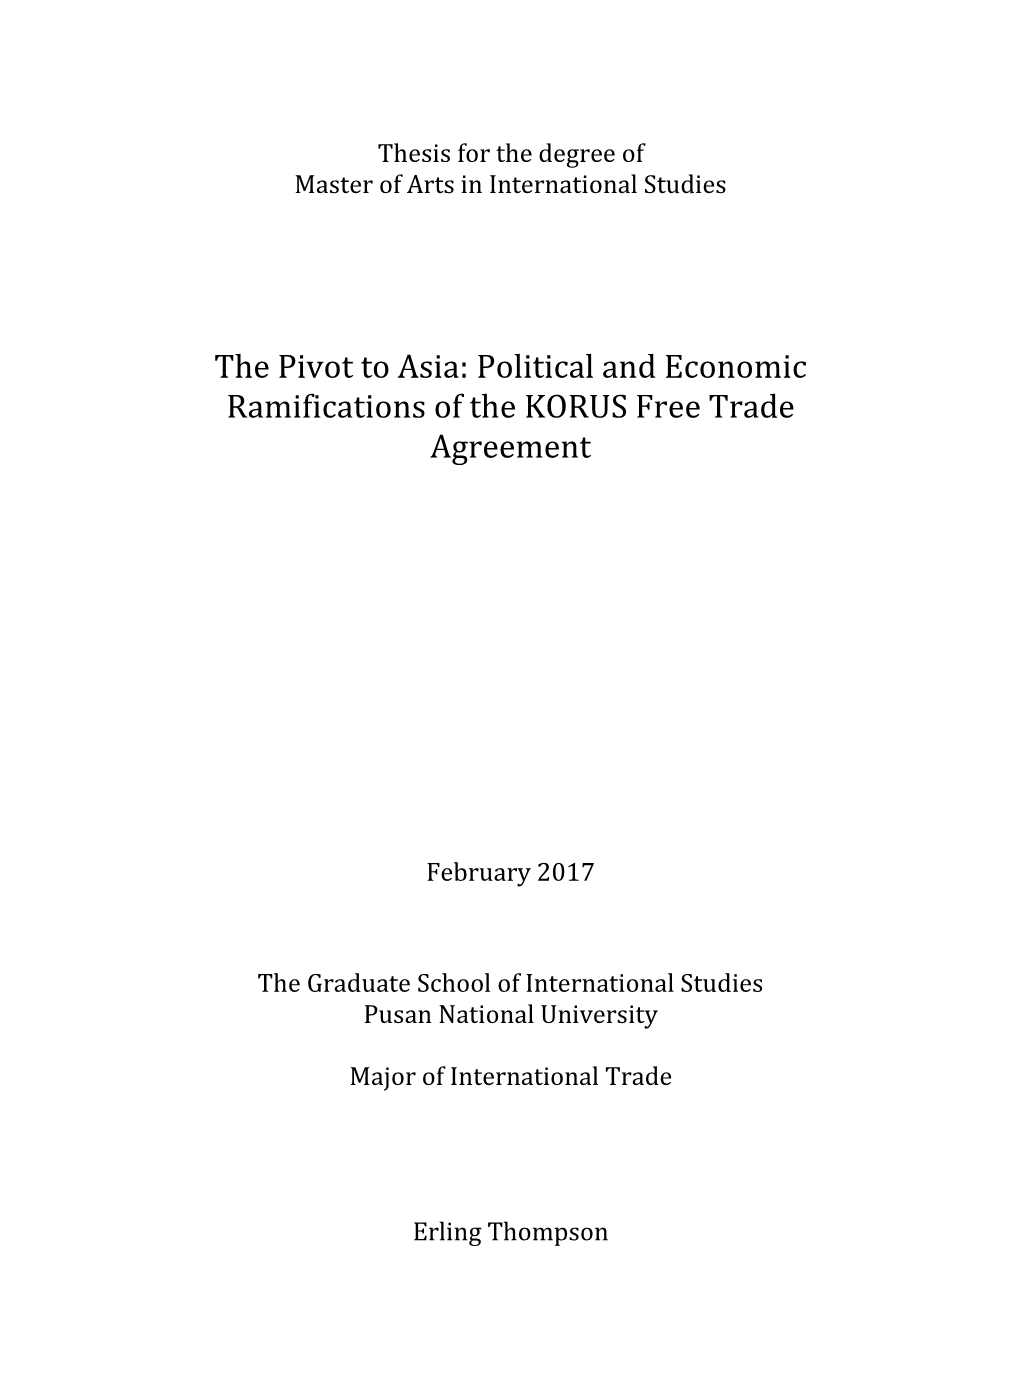 Political and Economic Ramifications of the KORUS Free Trade Agreement